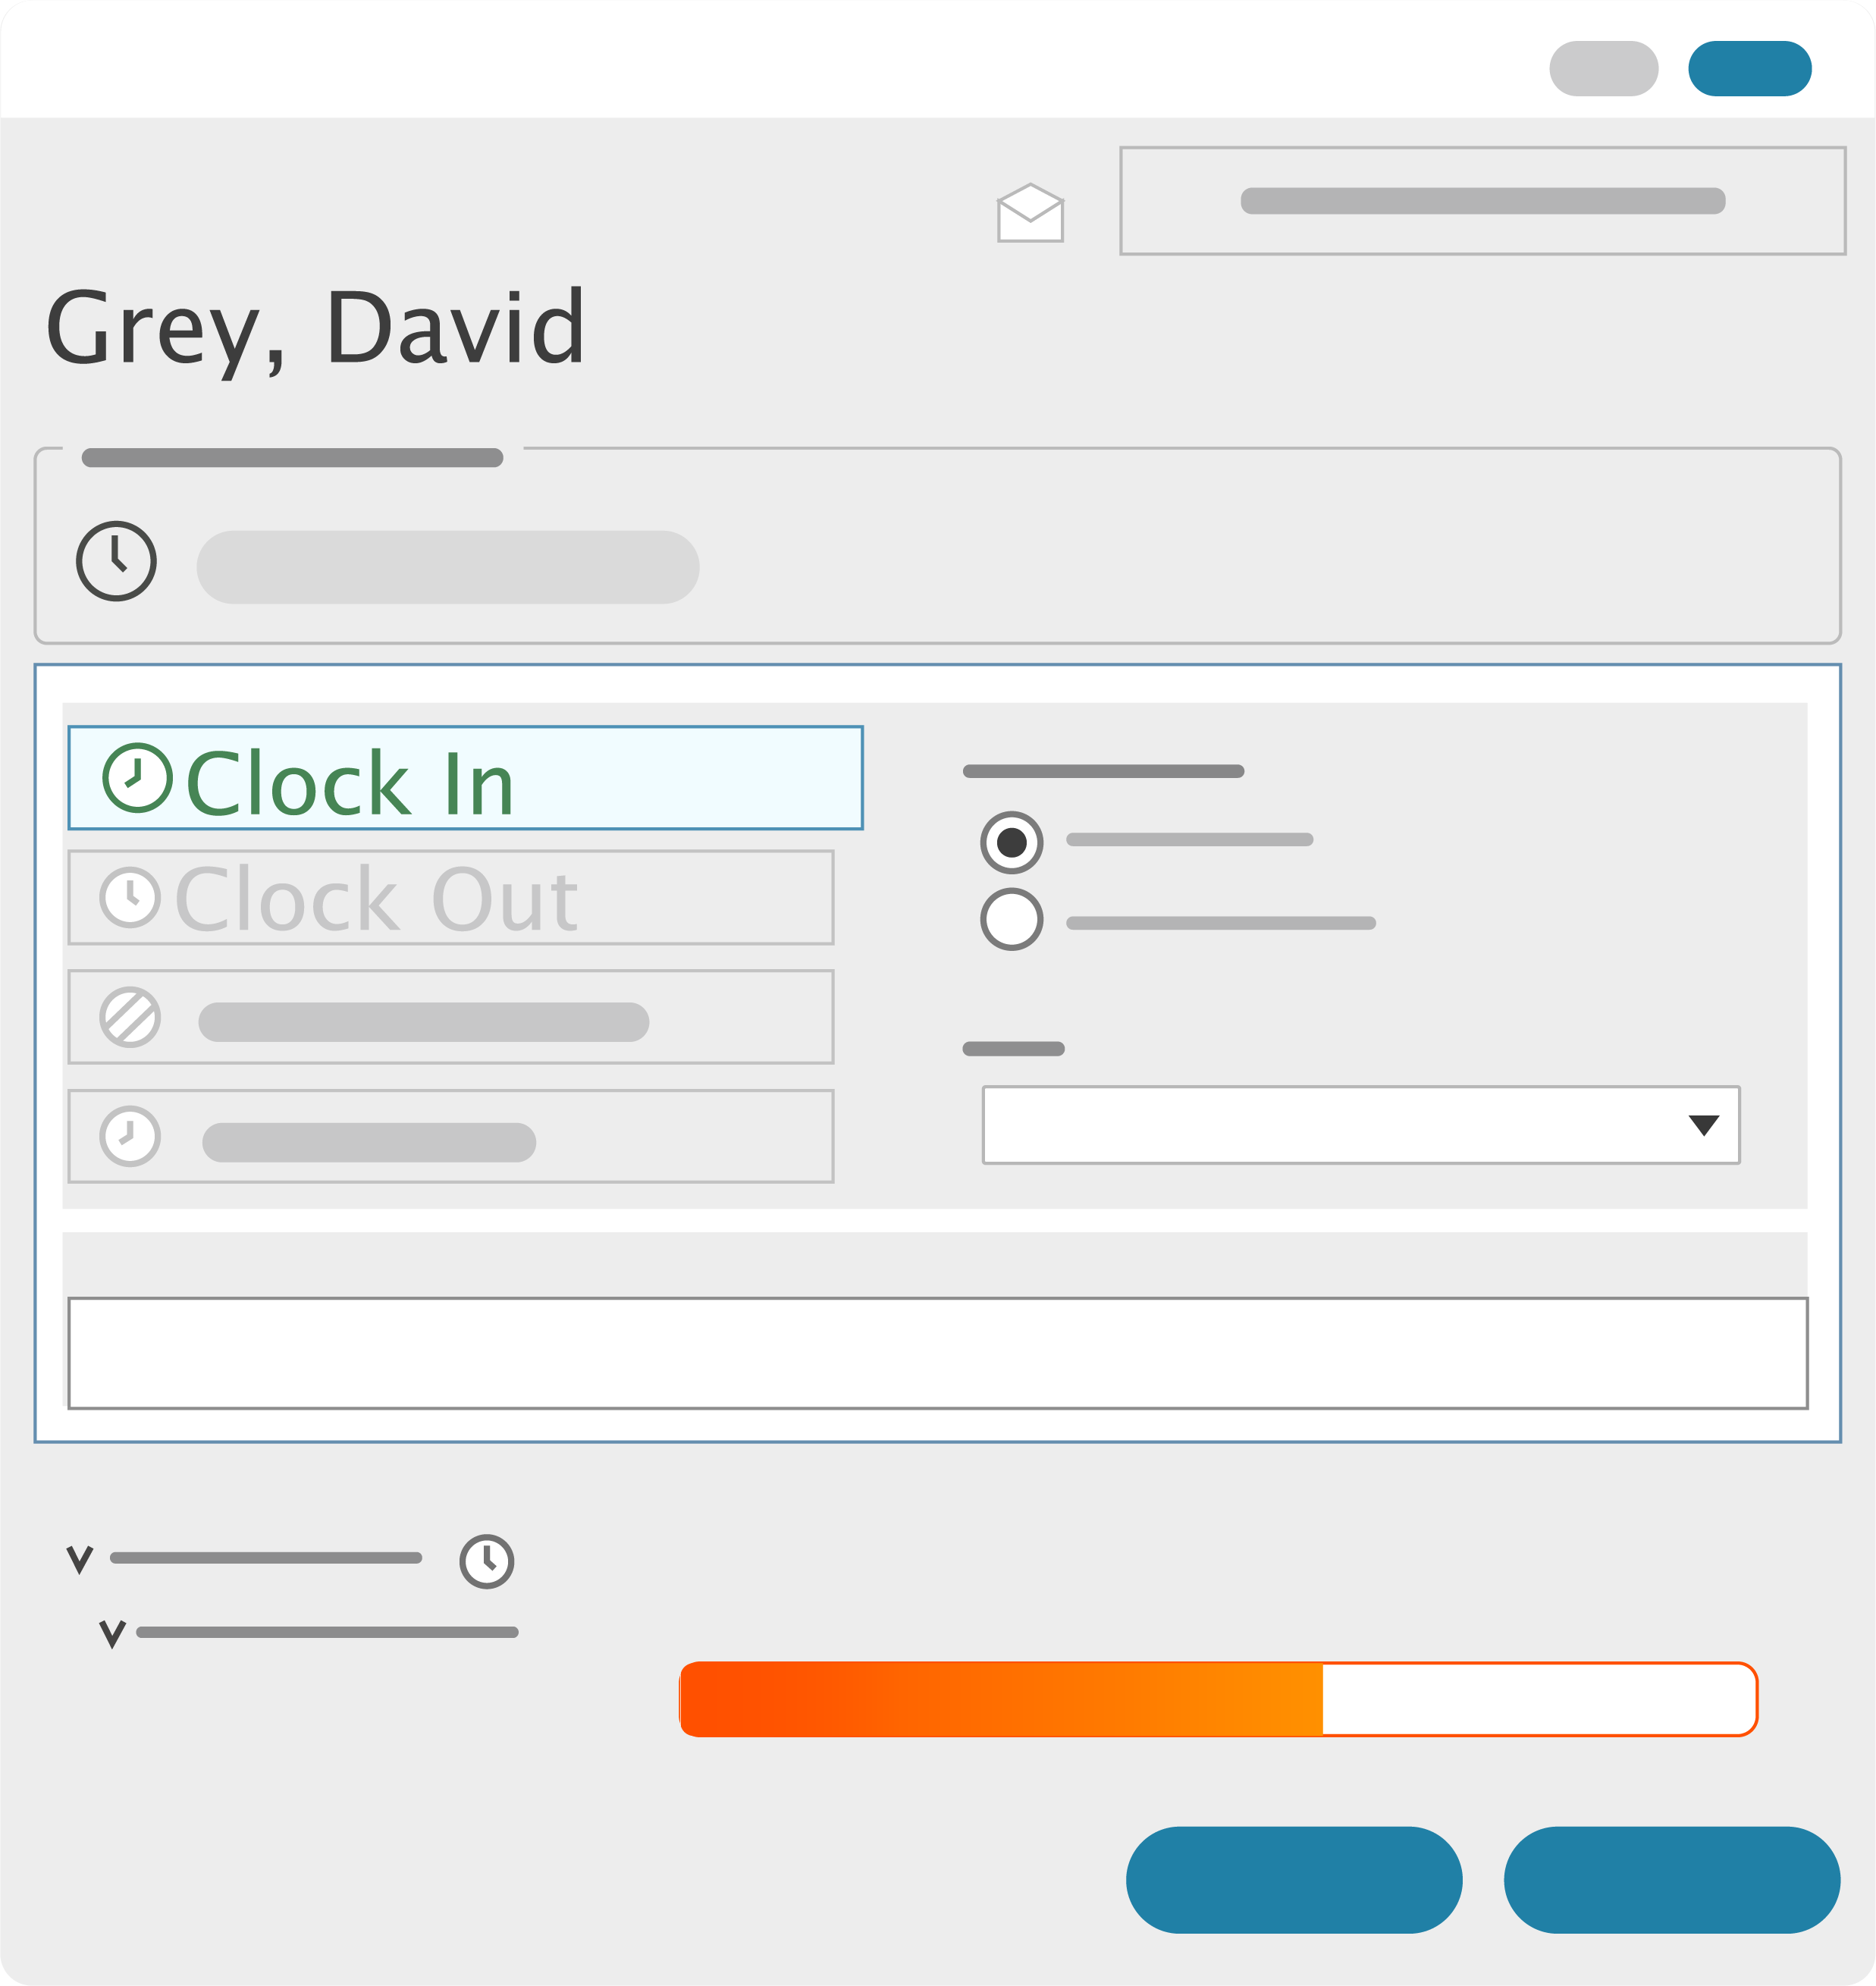 TimeClick Software - Clock in and out in seconds. Password requirement included but optional. See how close you are to hitting overtime and prevent it quickly. Clock in to a job or department easily and see messages from your employees or boss.